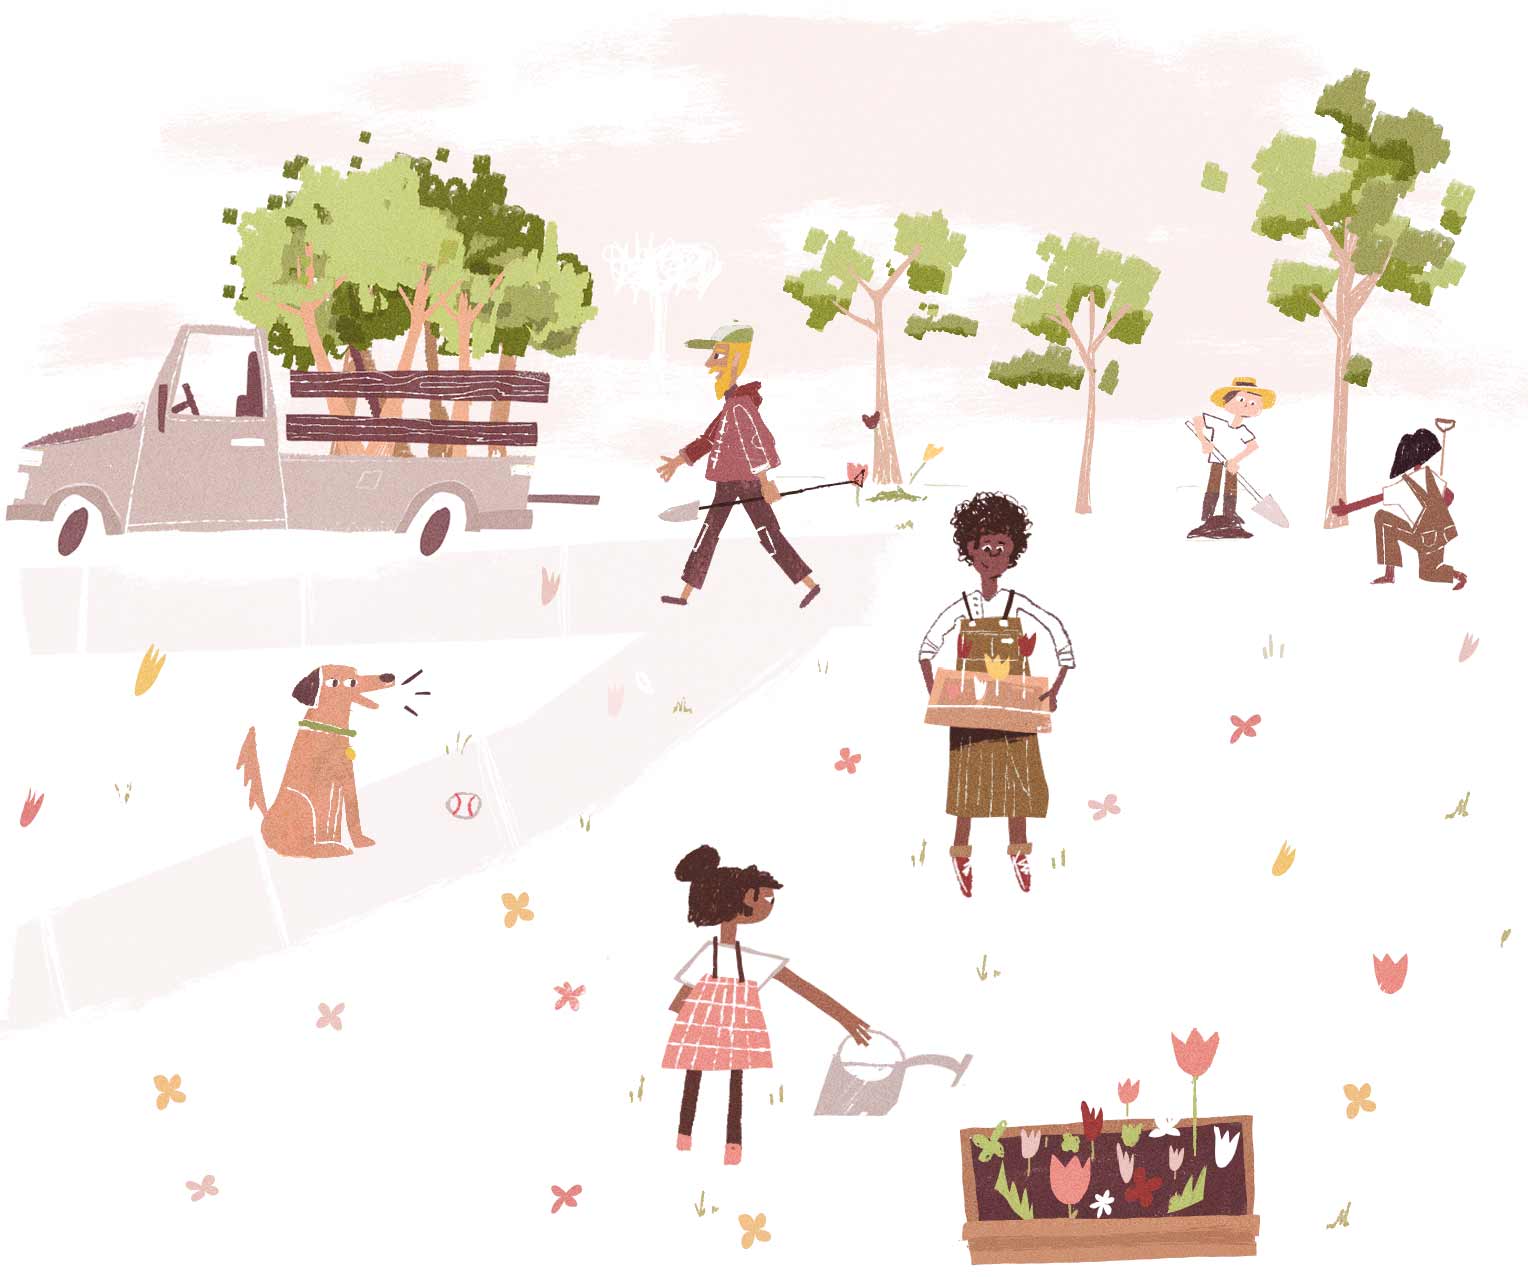 Event Management - Community Members Cleaning a Park Illustration